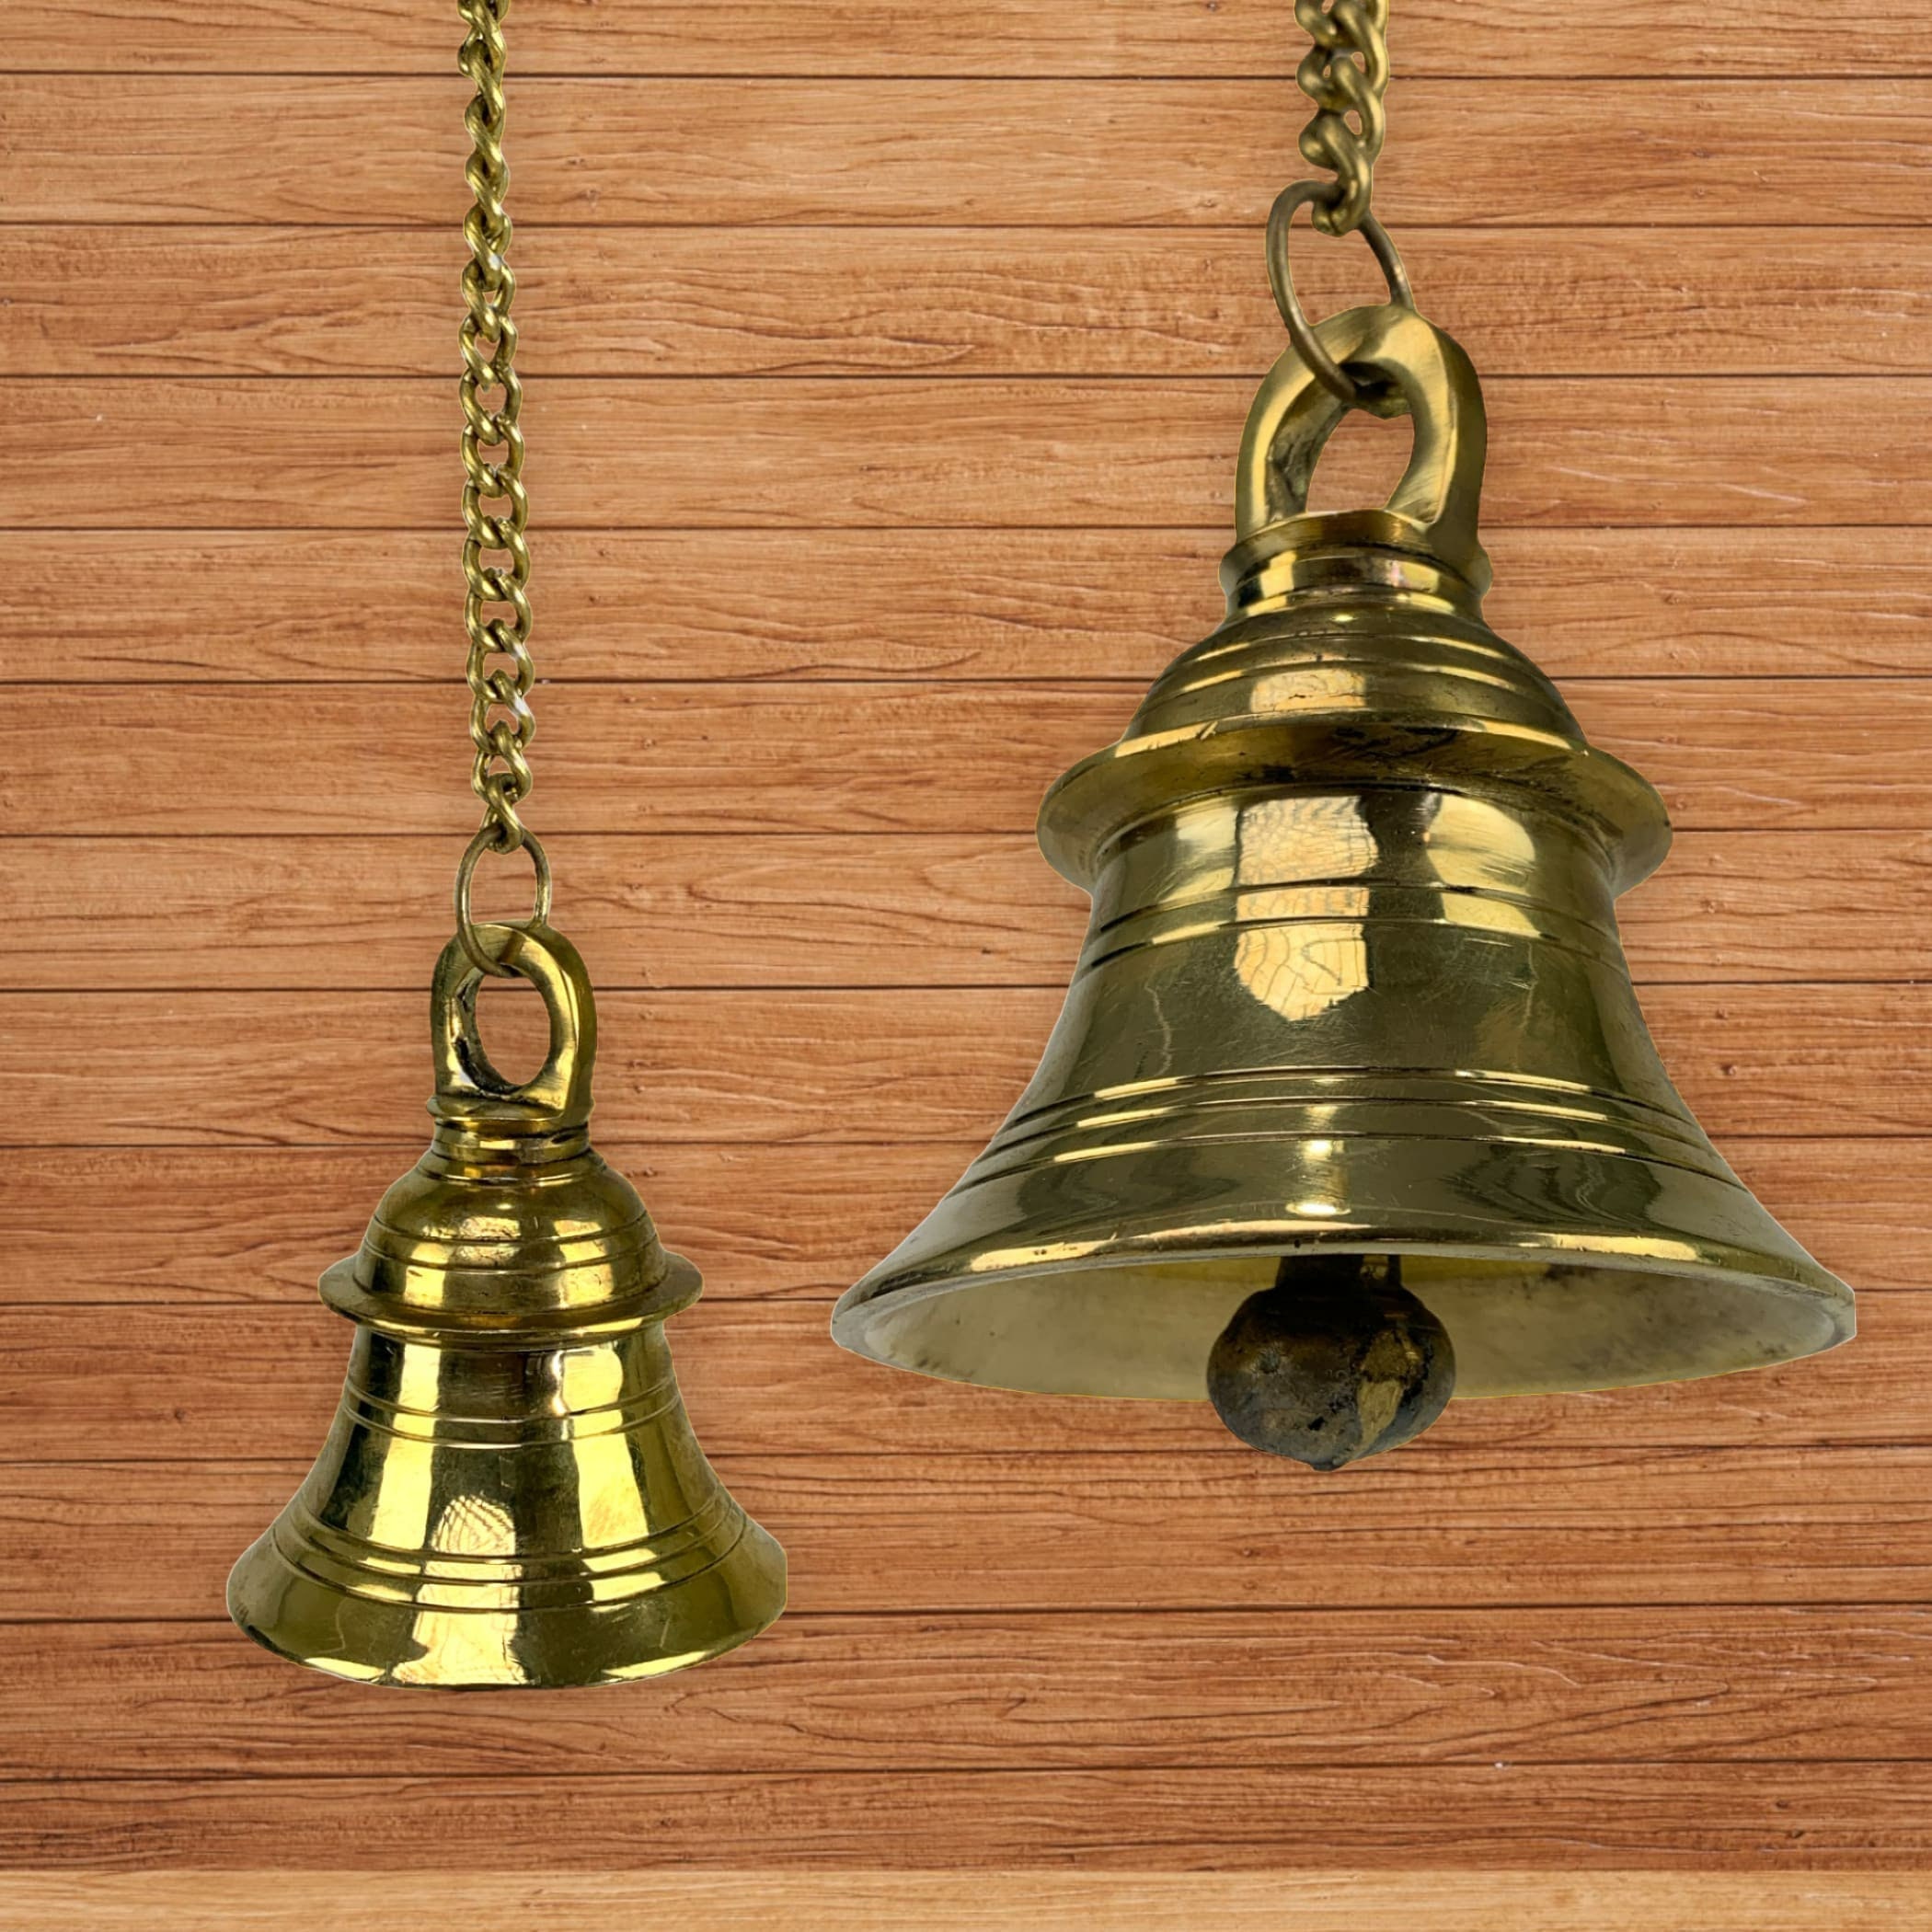 Hanging Bell in Brass, Brass Long Bell With Chain, Hanging Ritual